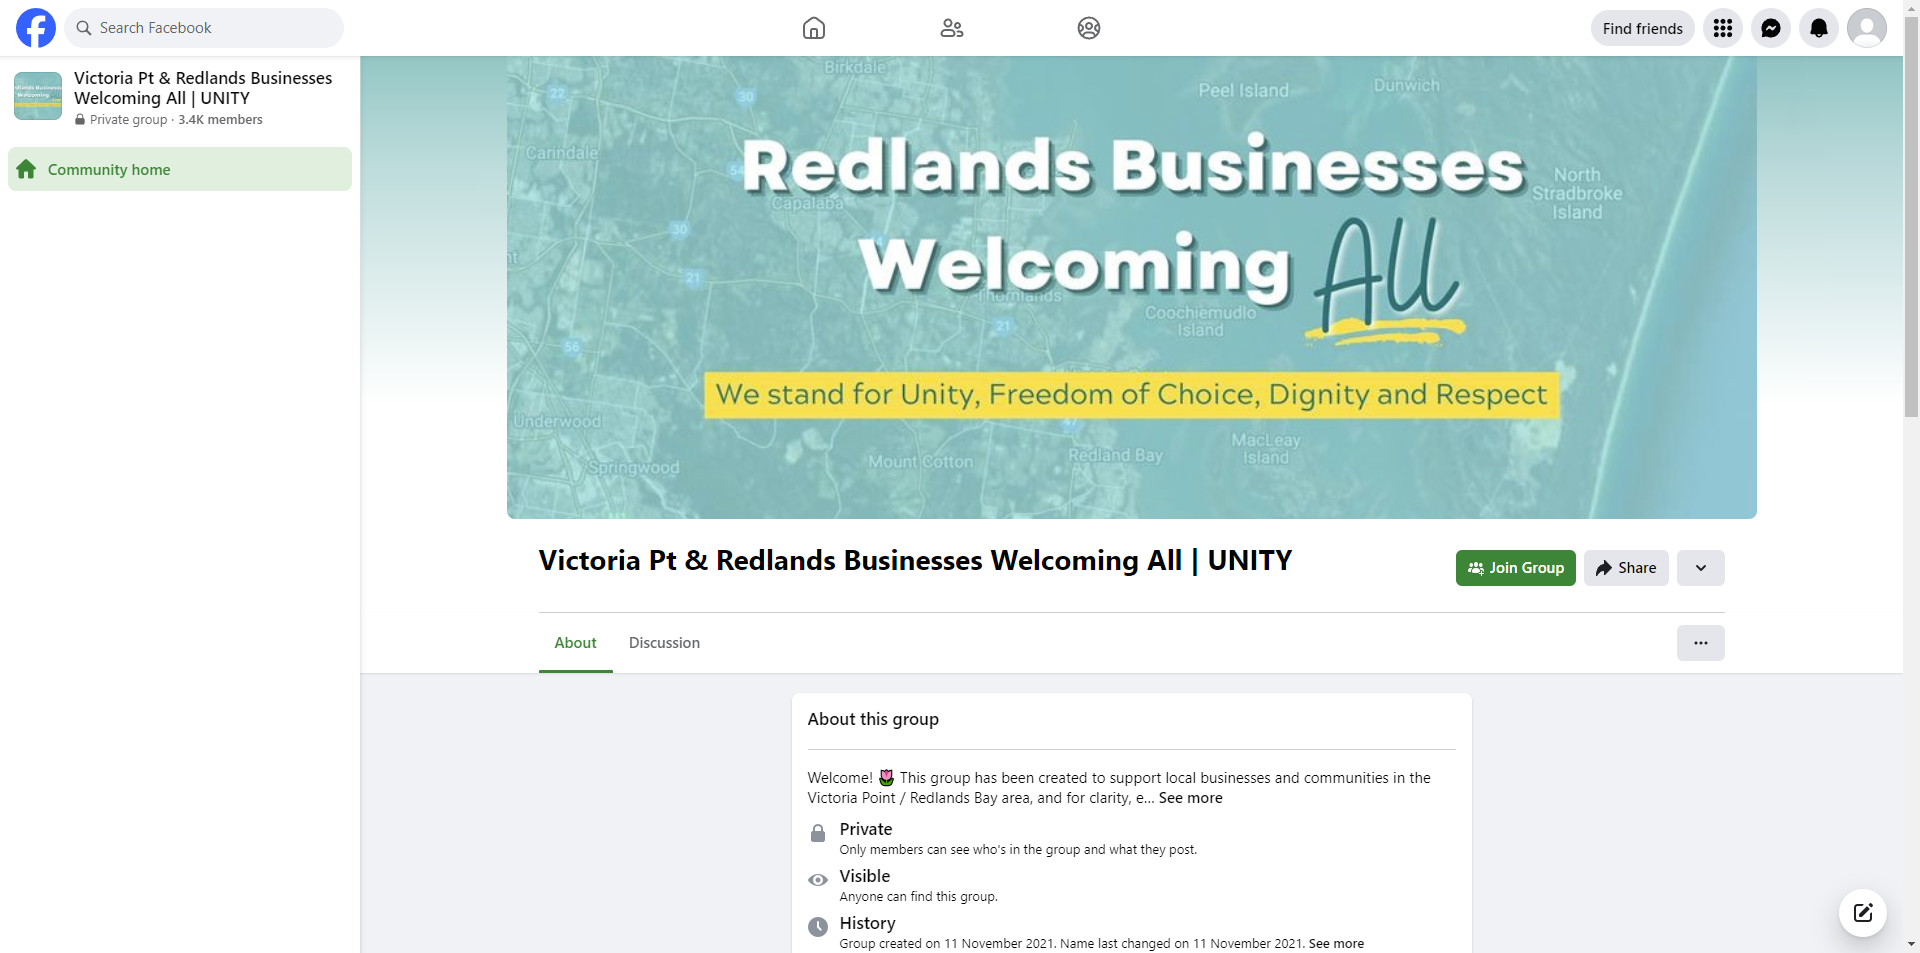 Victoria Pt & Redlands Businesses Welcoming All | UNITY